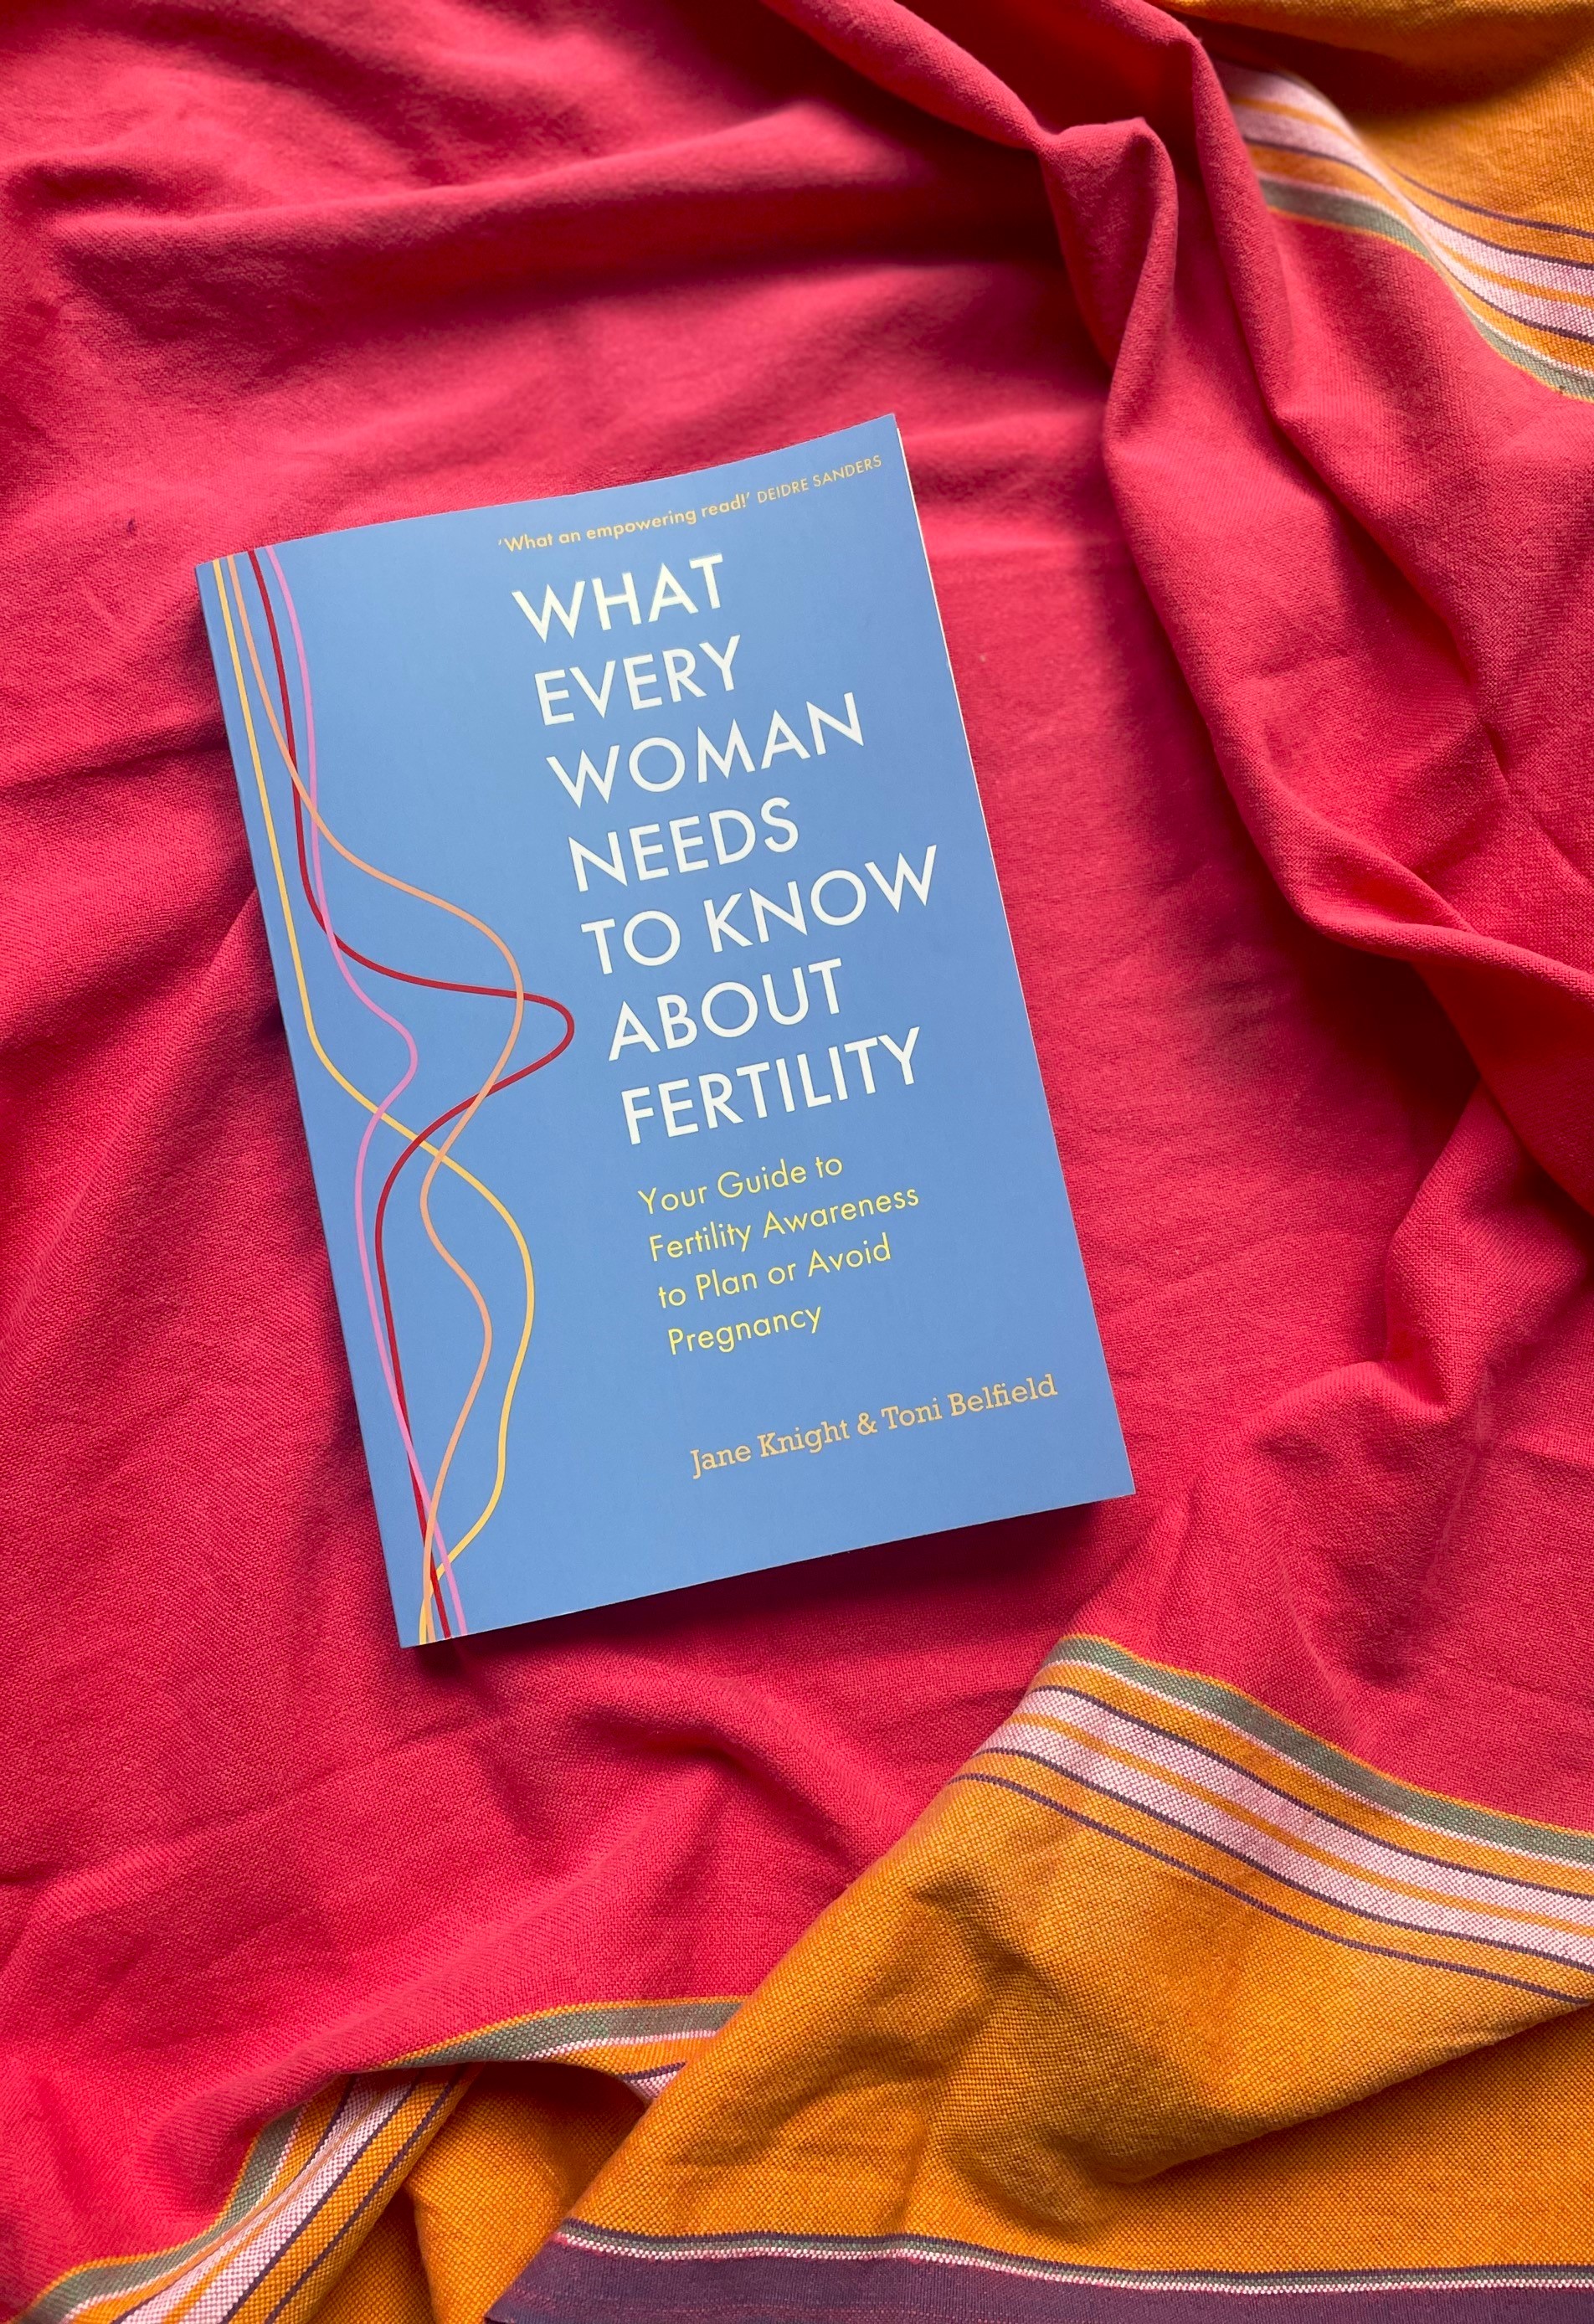 A photograph of the book What Every Woman Needs to Know About Fertility placed on a red fabric background.